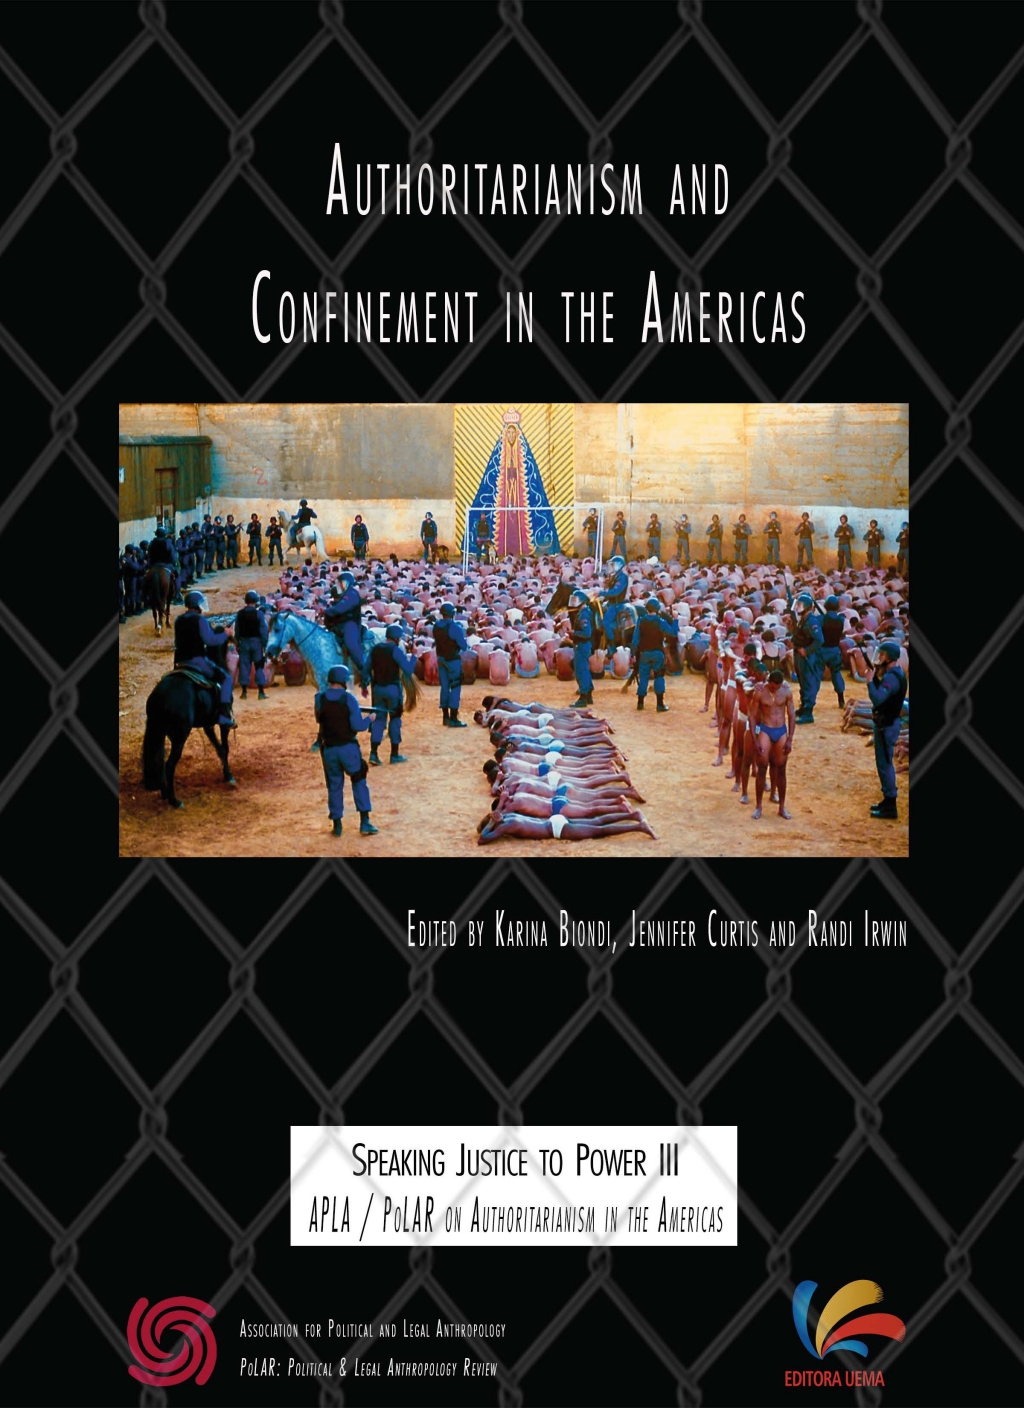 Authoritarianism and confinement in the Americas (DISPONÍVEL PARA DOWNLOAD)